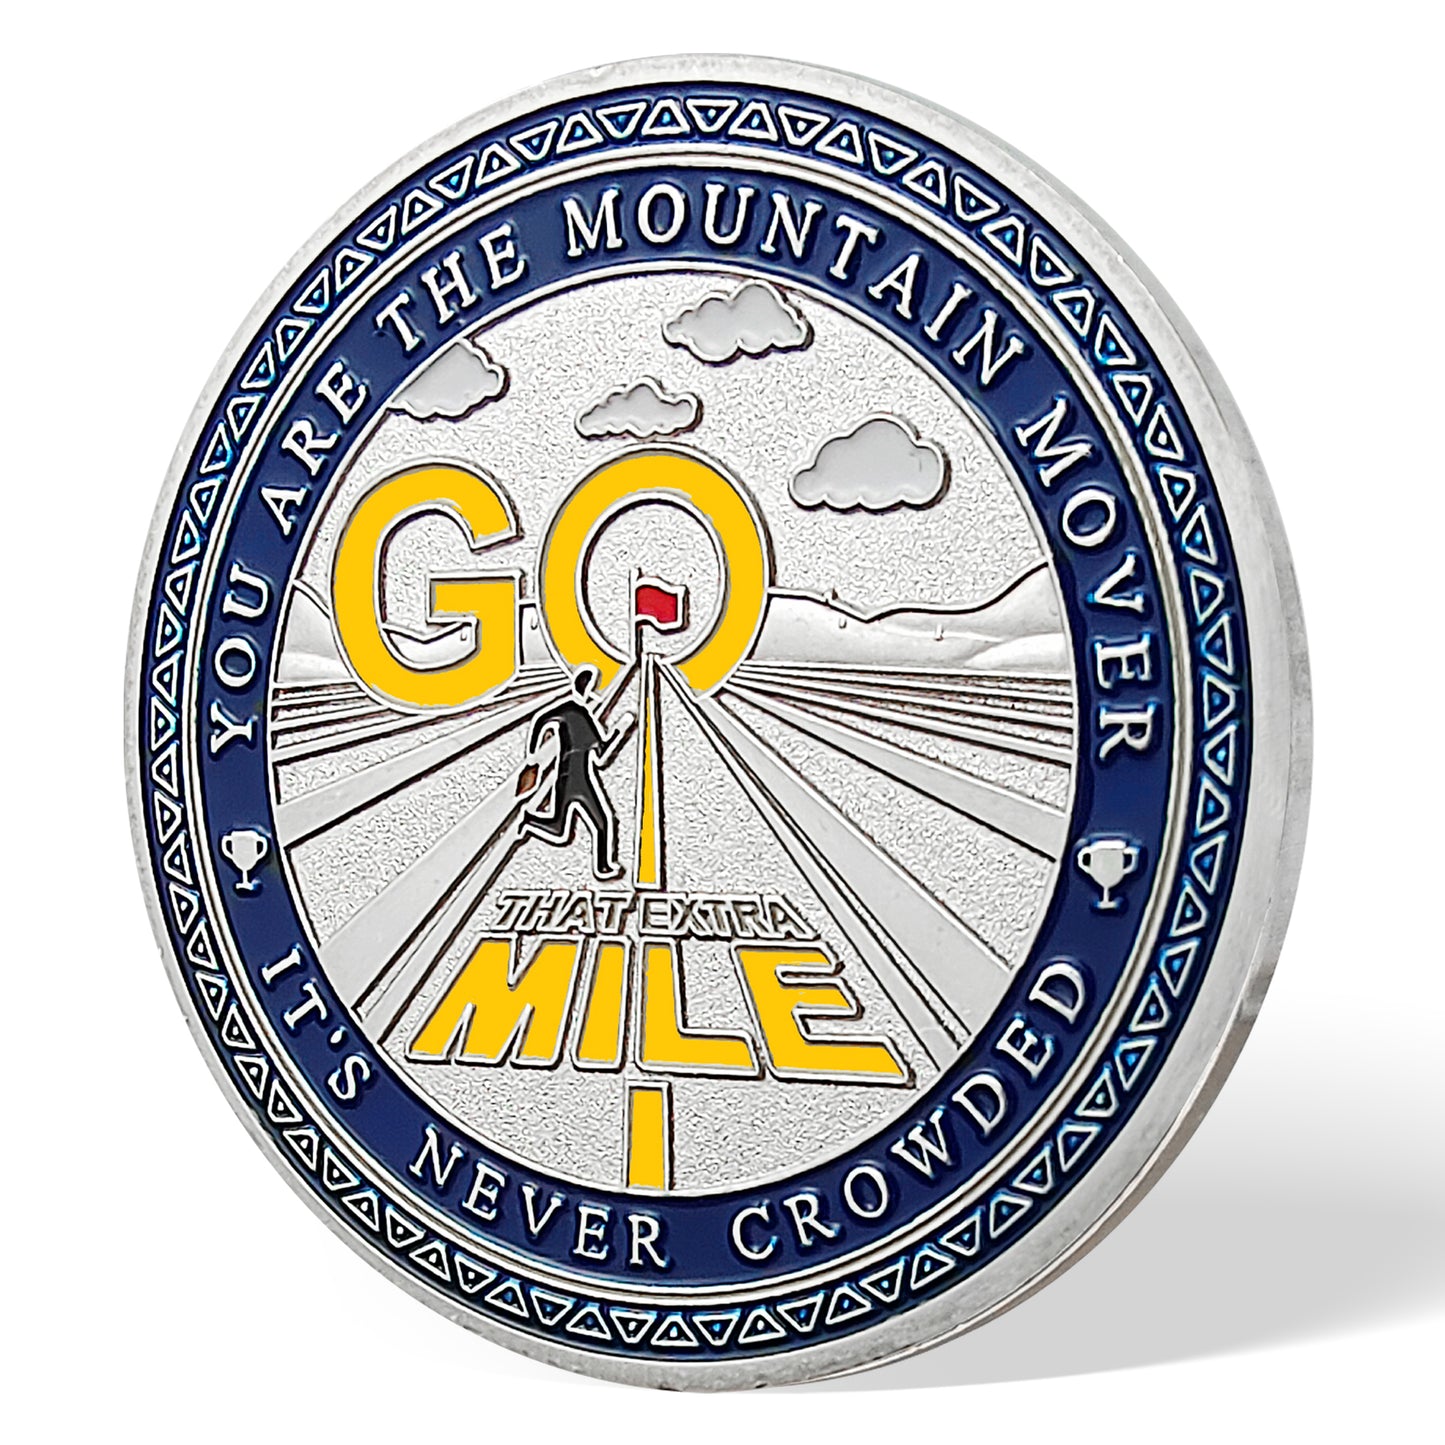 Encouragement Challenge Coin-employee Appreciation Gifts Inspirational Thank You Coin for Students and Cowokers-roads and Red Flags